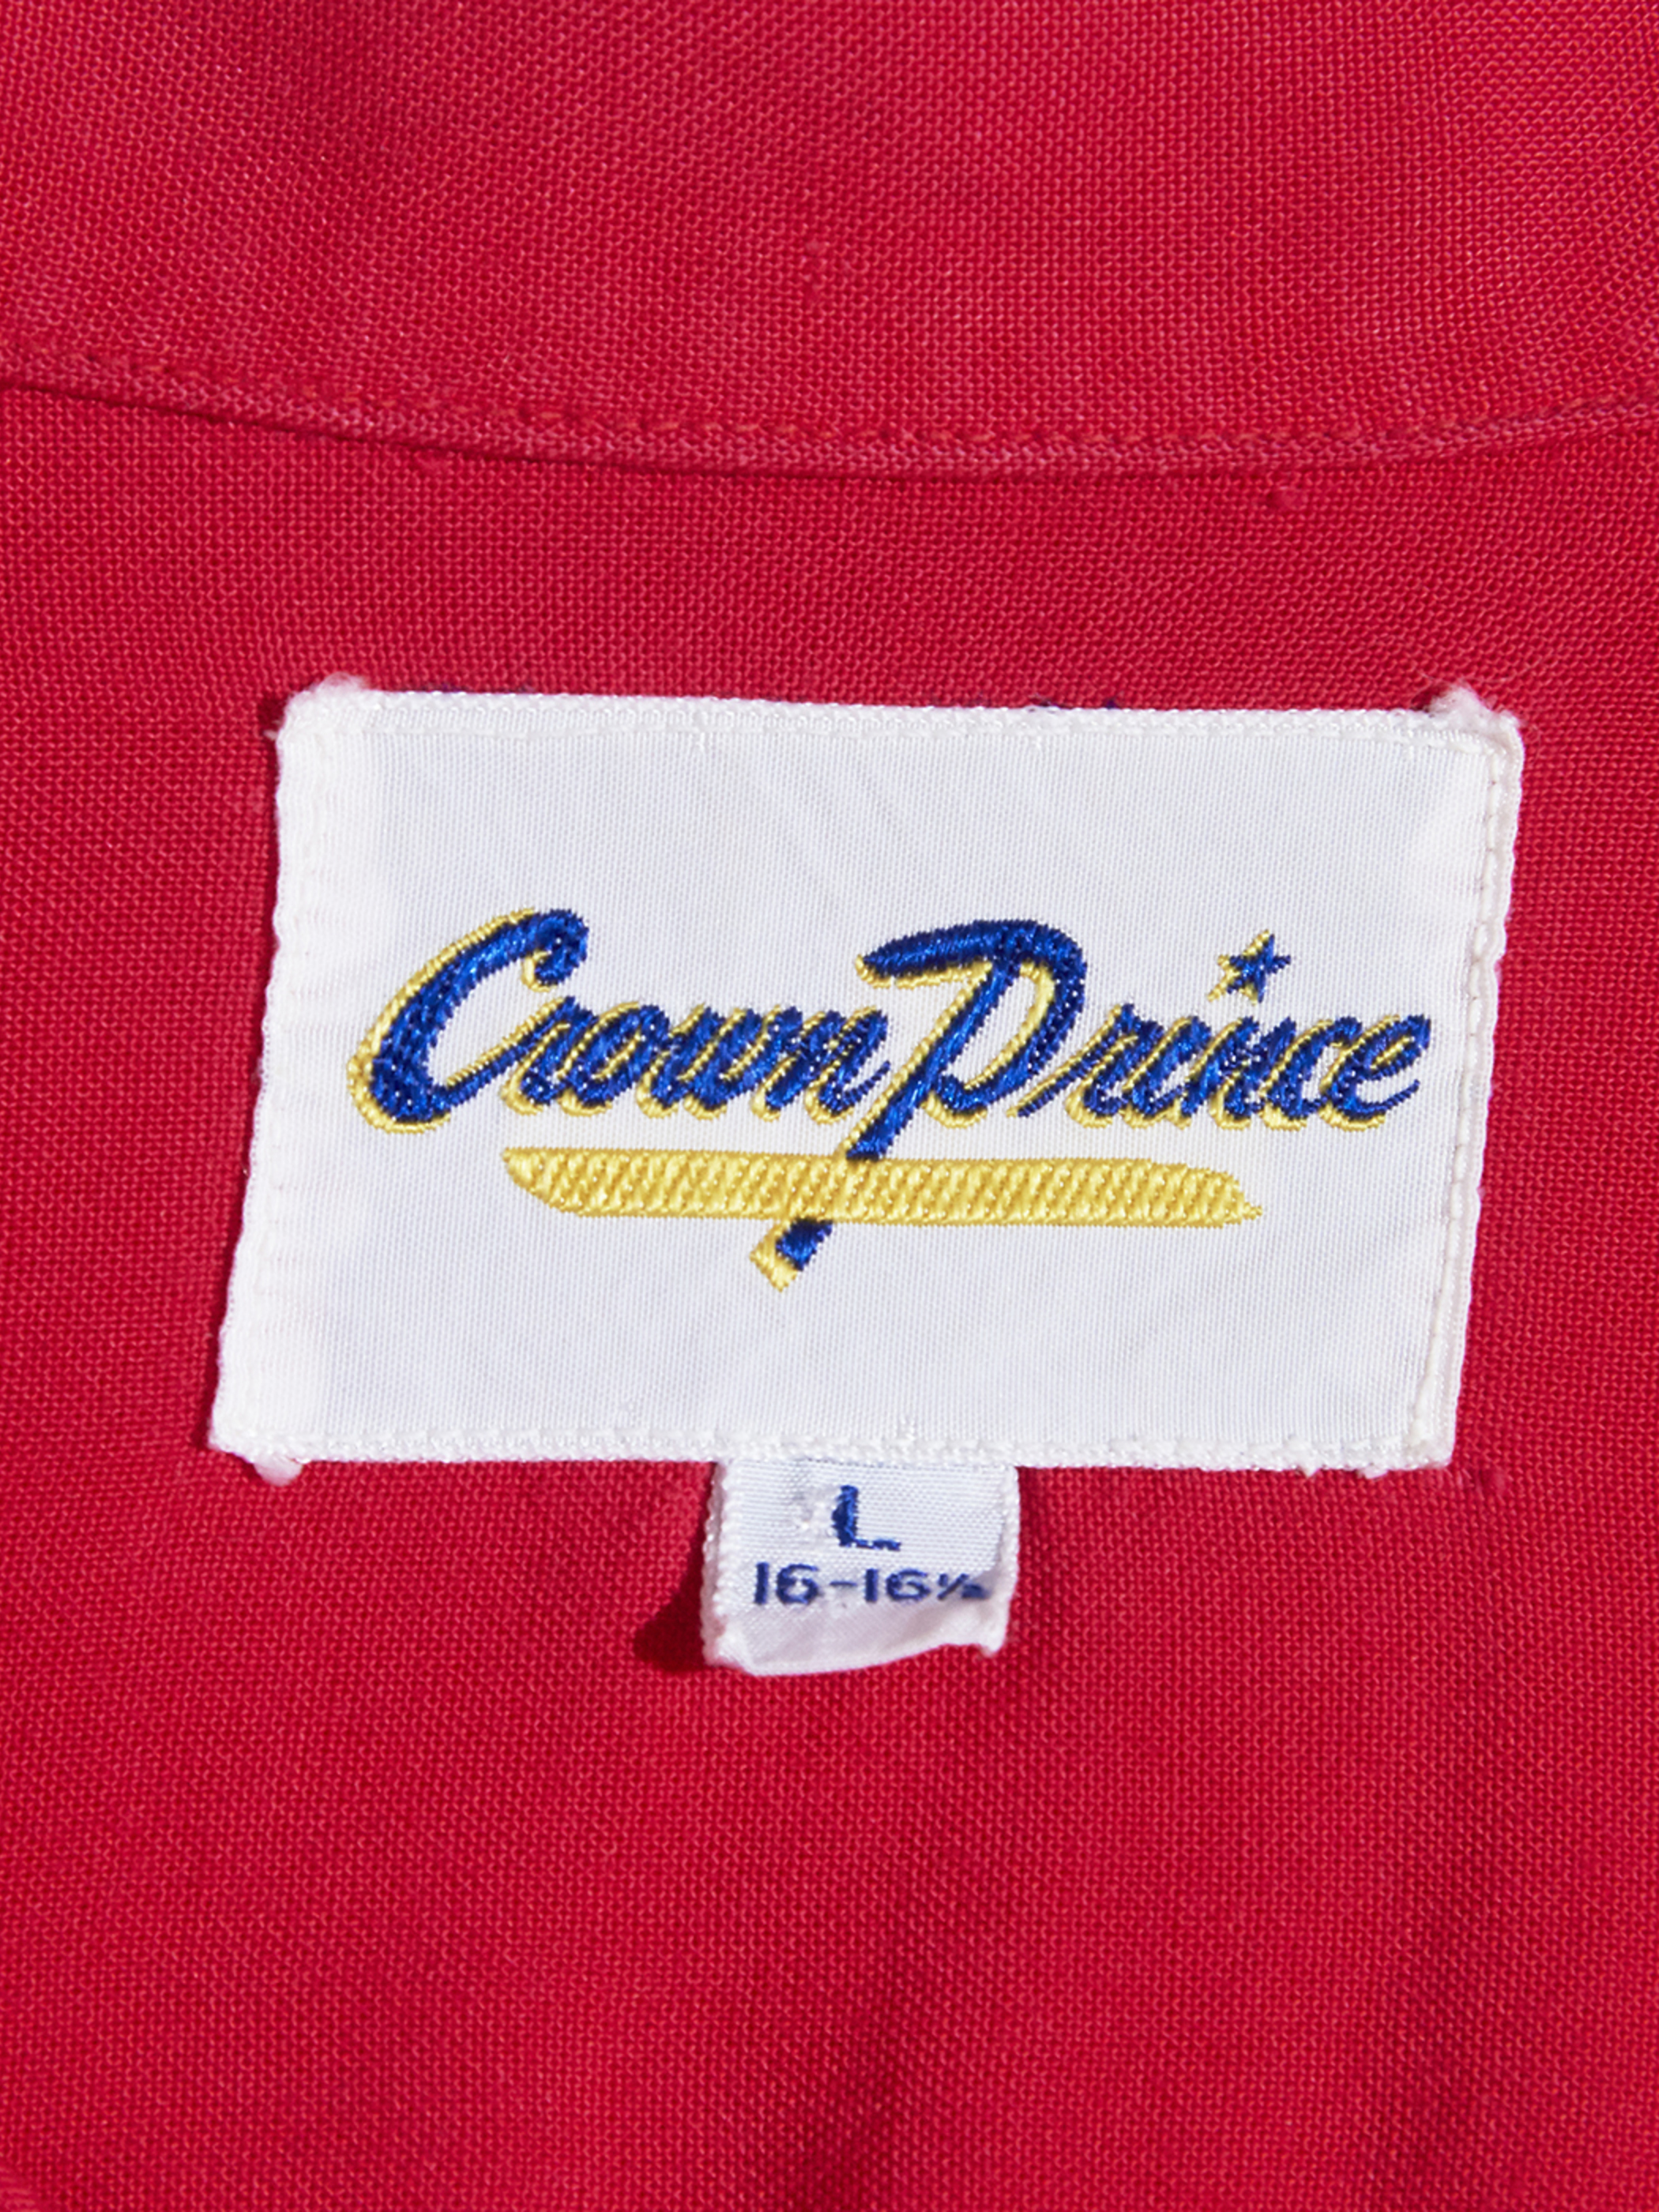 1960s "Crown Prince" s/s rayon embroidery shirt -RED-